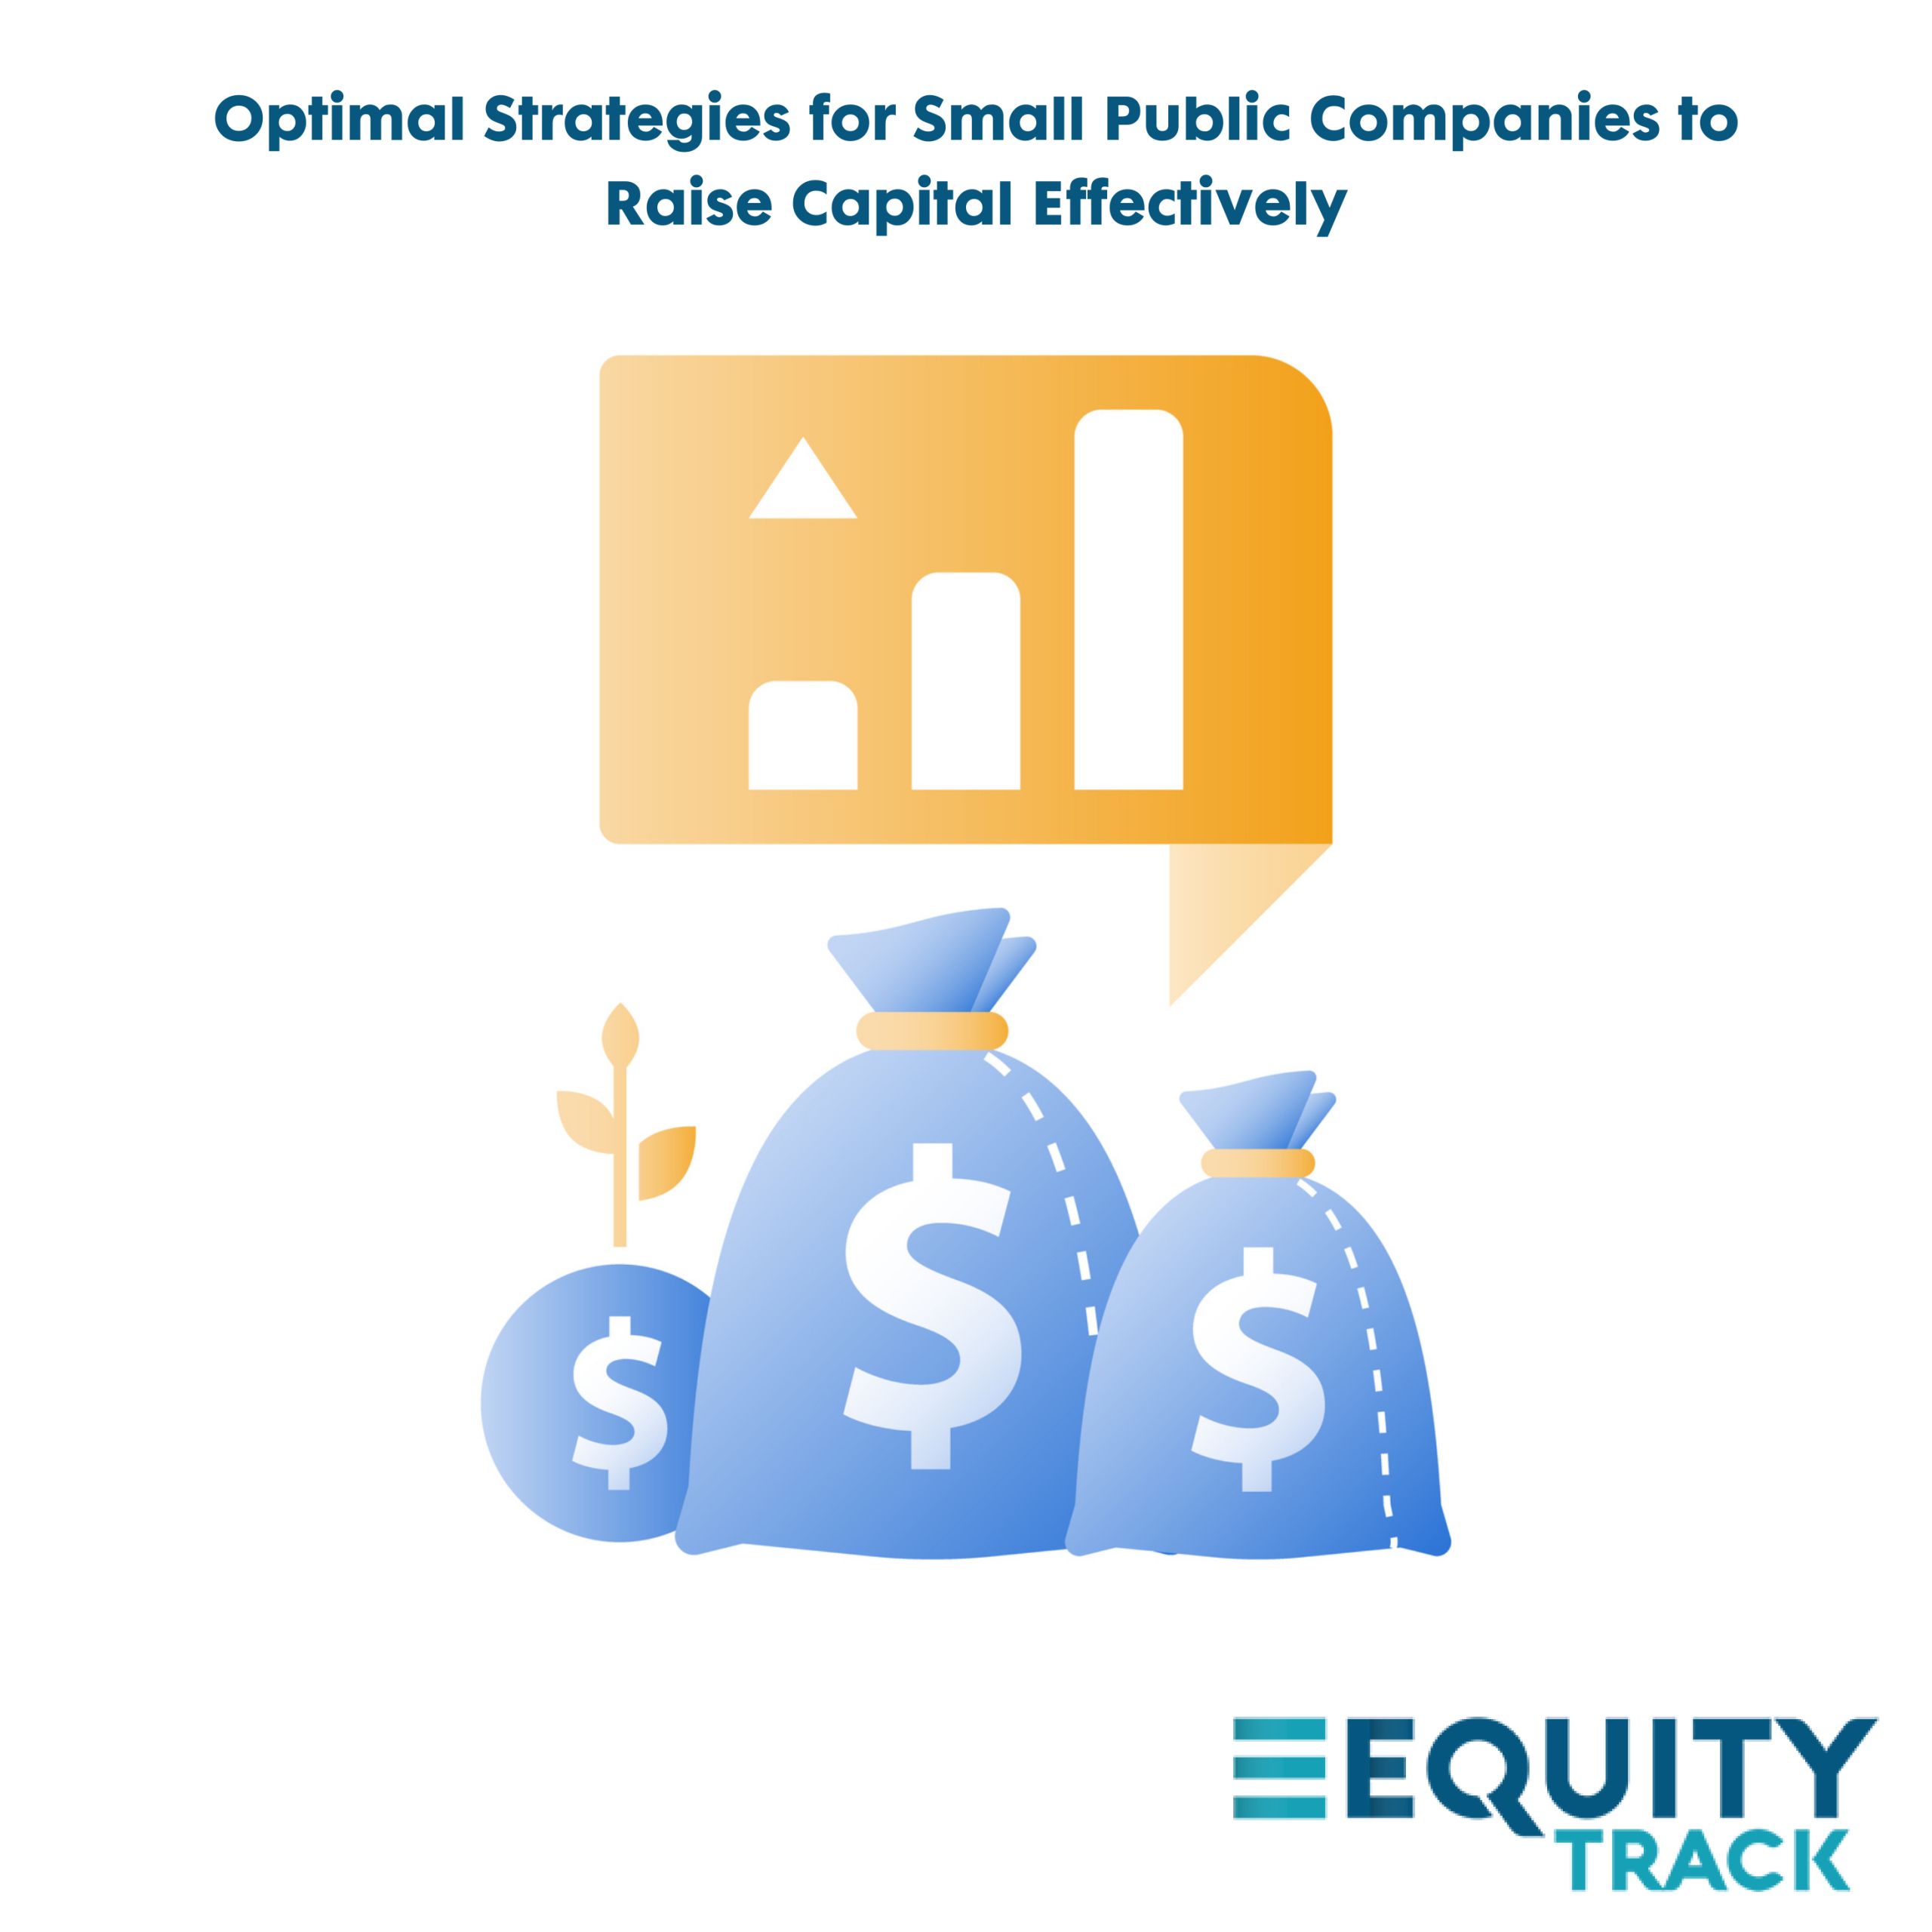 The Best Options for Raising Capital for Small Public Companies